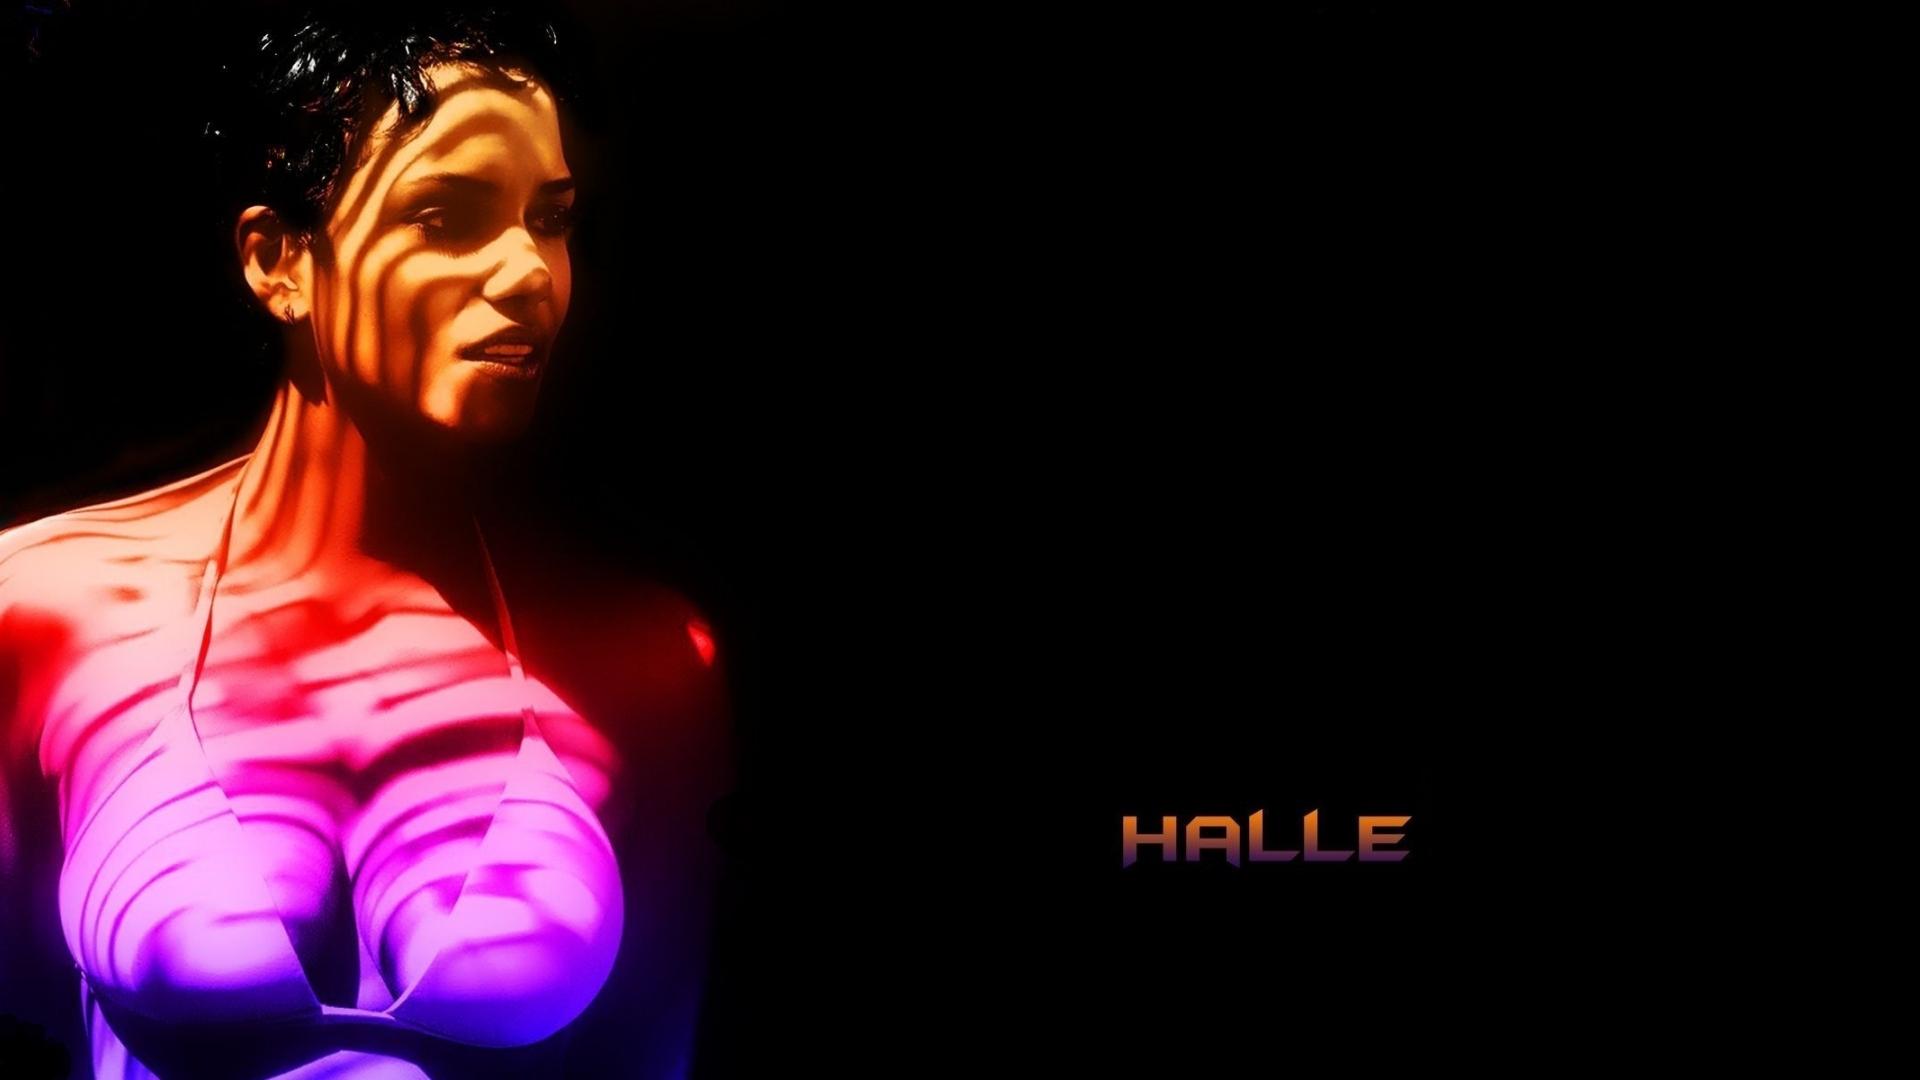 Halle Berry Best Widescreen Background Awesome HD Wallpaper Of